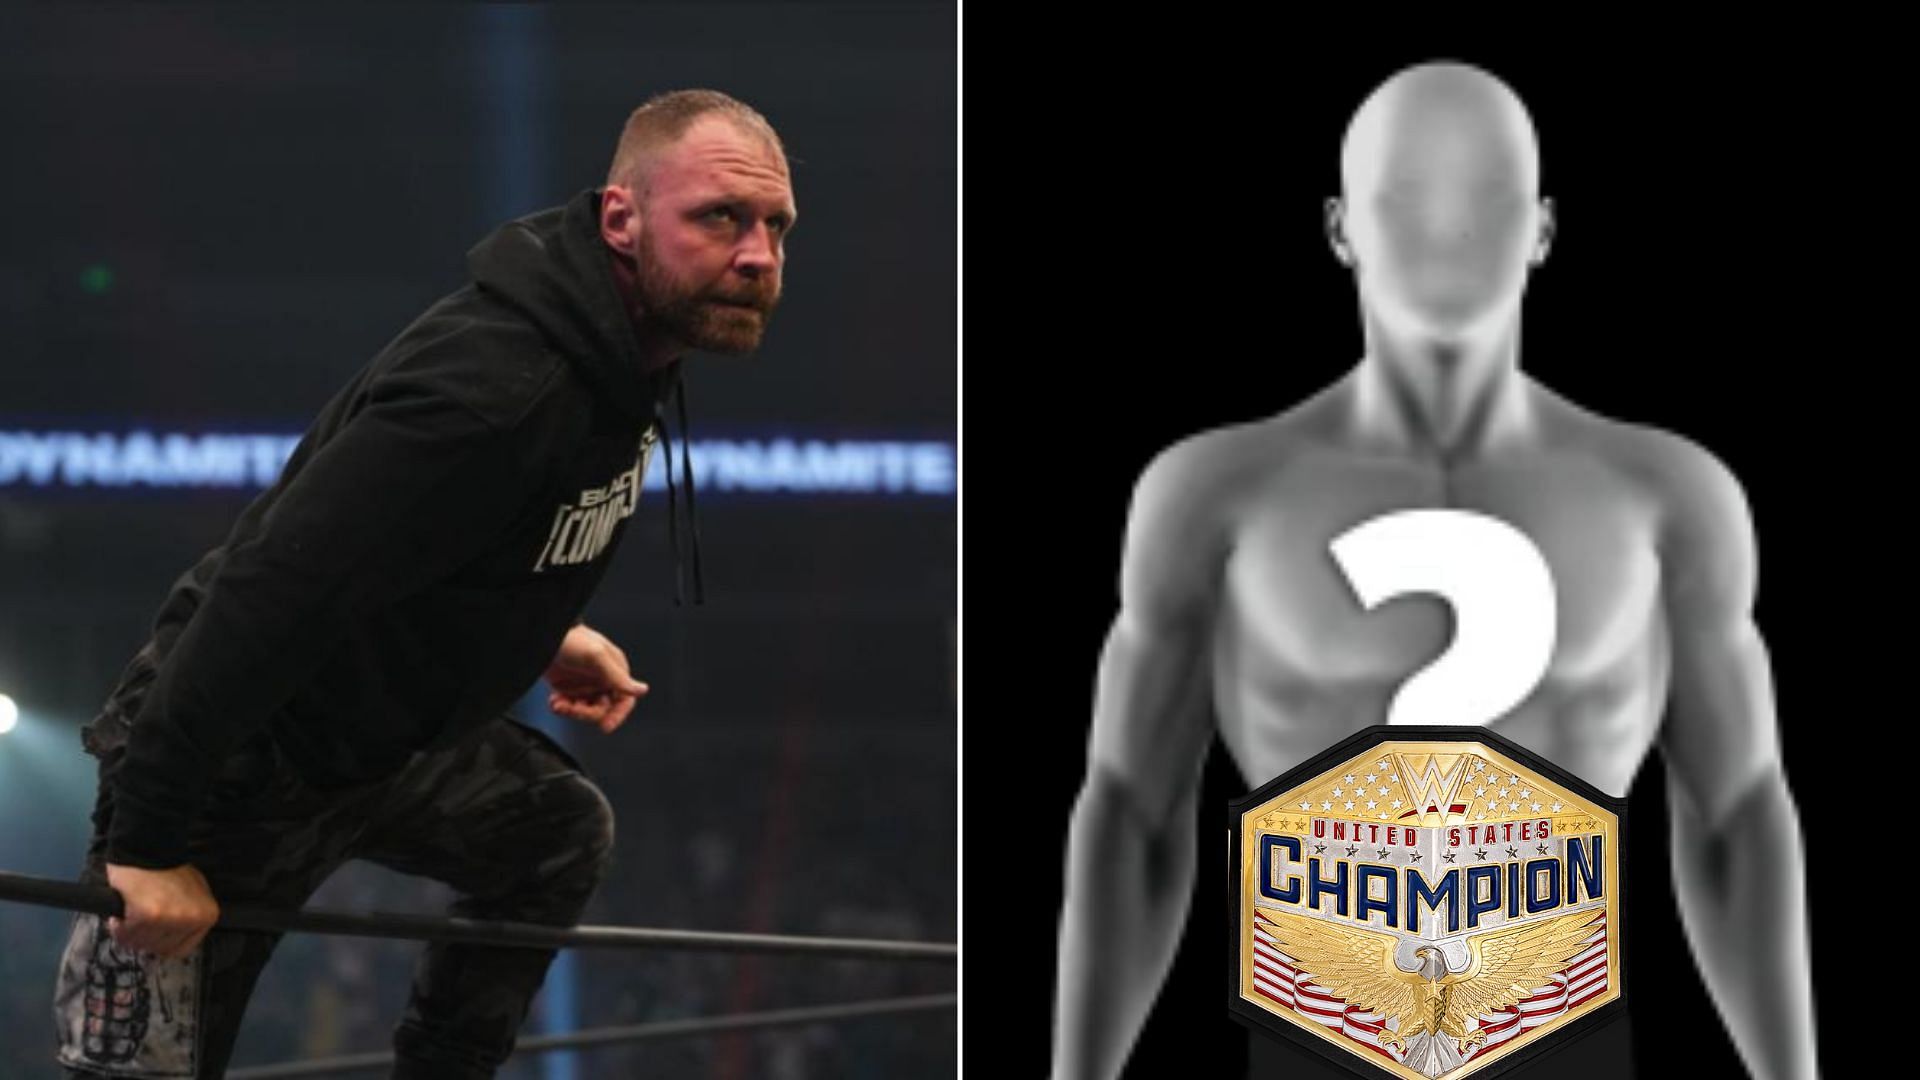 Jon Moxley faced an indie star this past week on Rampage